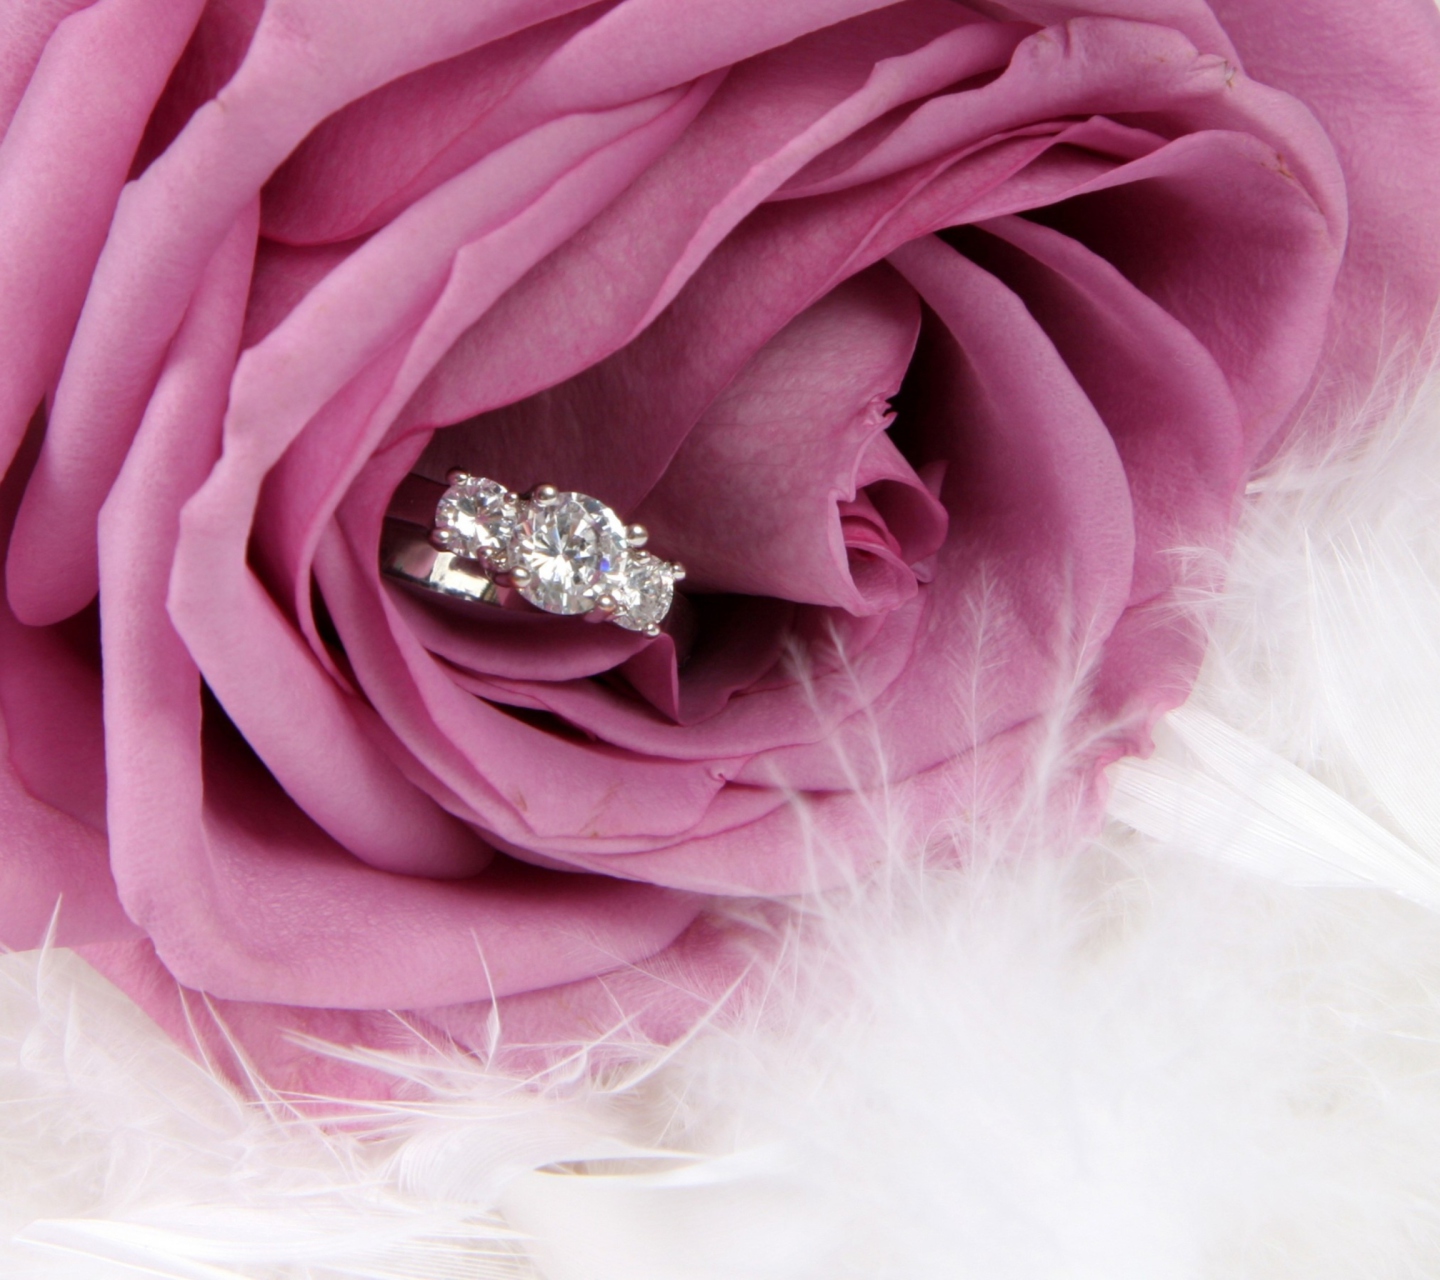 Обои Engagement Ring In Pink Rose 1440x1280